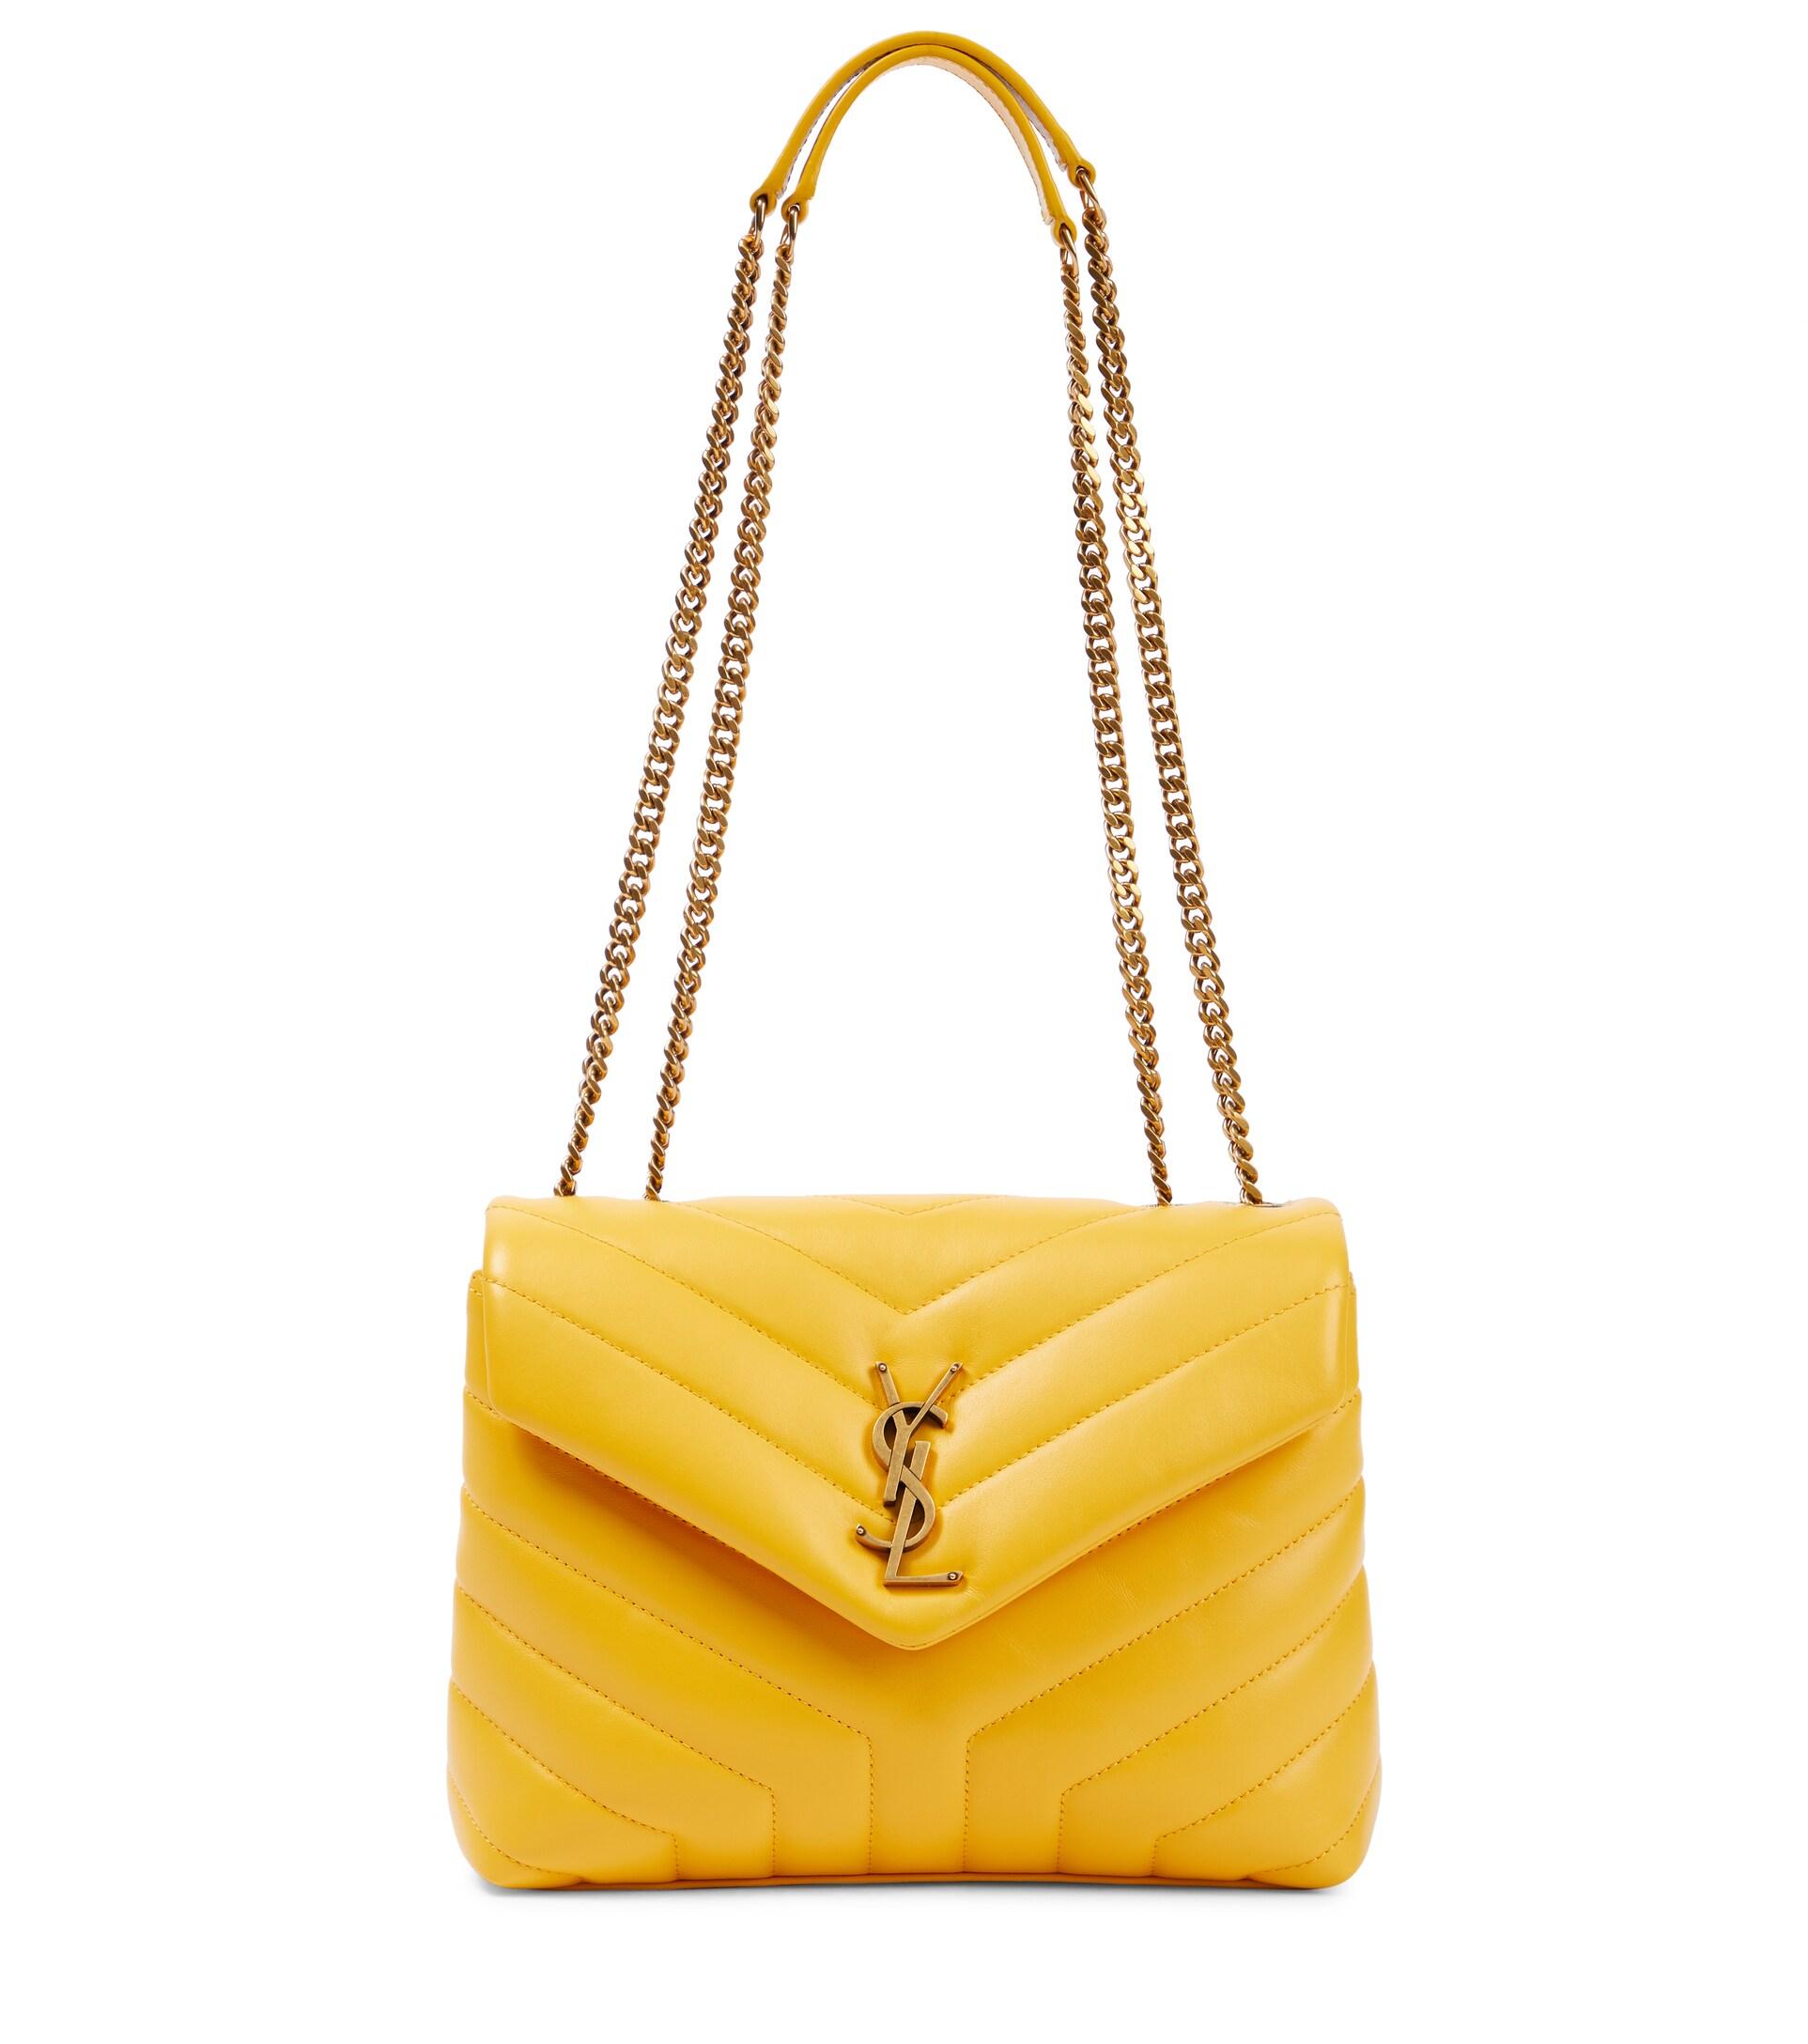 Saint Laurent Loulou Small Leather Shoulder Bag in Yellow | Lyst